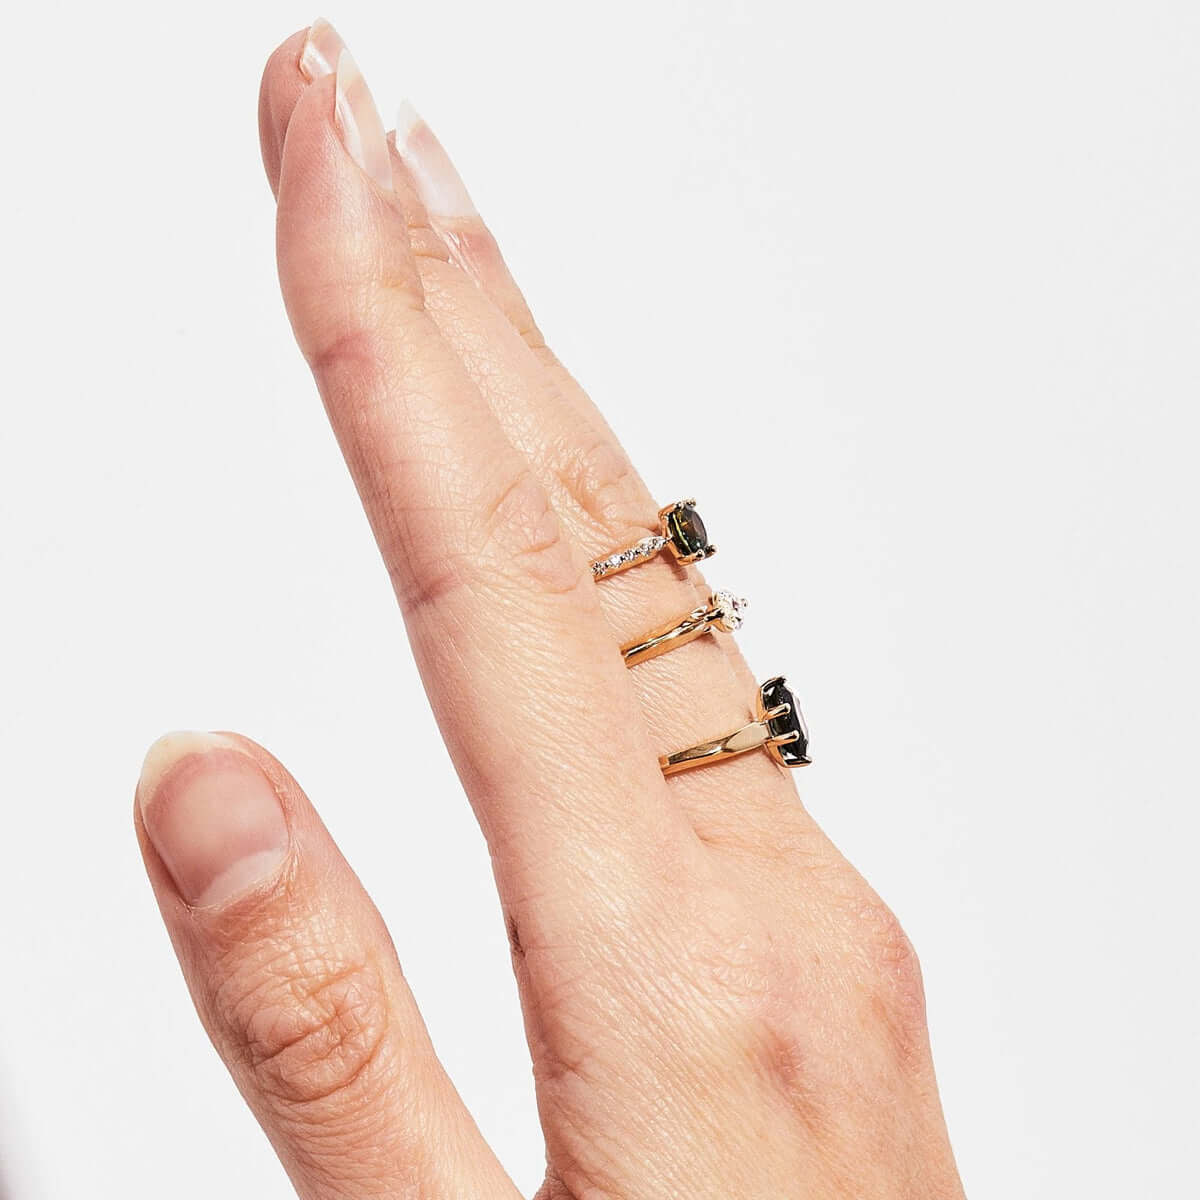 A hand model showing a side view of 3x gold rings featuring sapphires and white diamonds. 